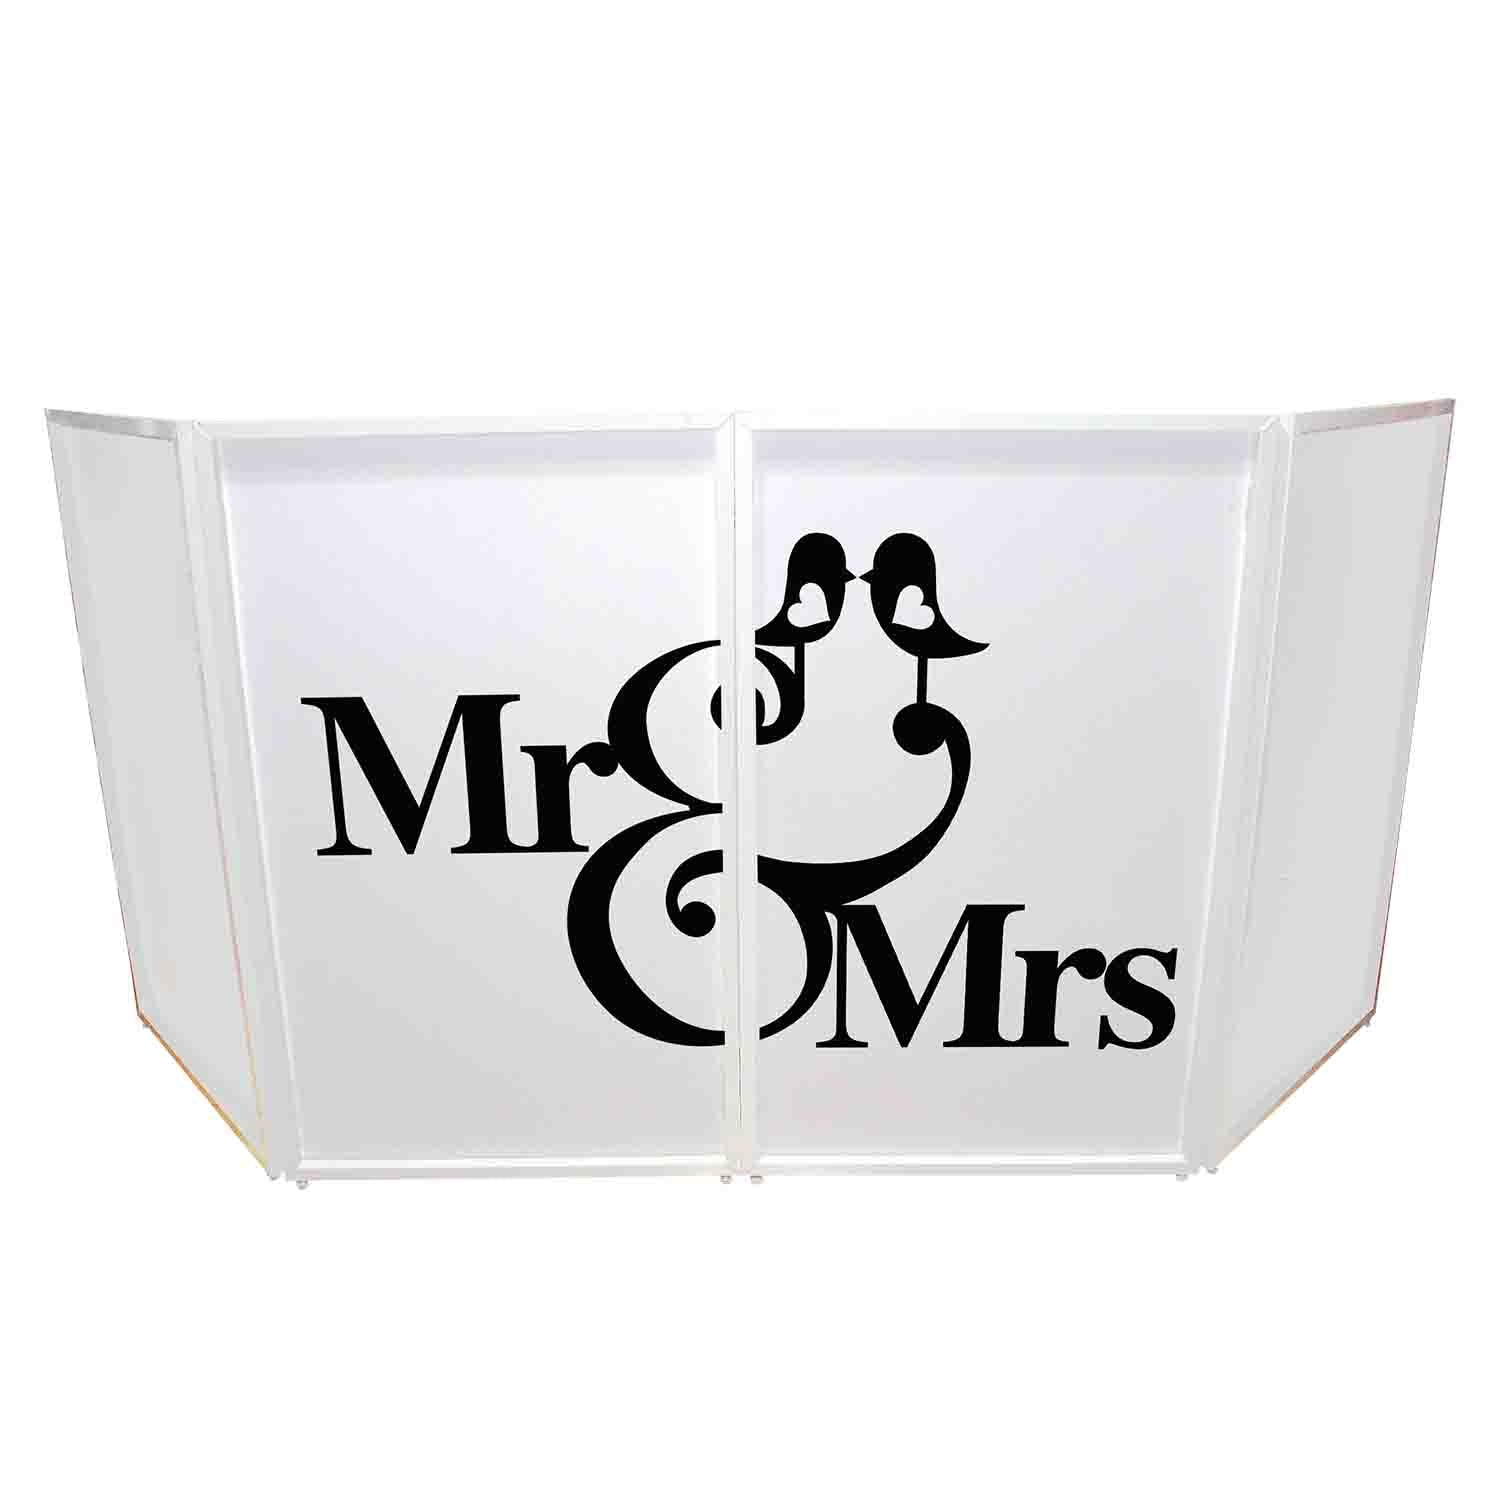 REPLACEMENT SCRIMS ProX XF-SMRMRS20X2 Set of Two Mr and Mrs Facade Enhancement Scrims - Black Script on White by ProX Cases